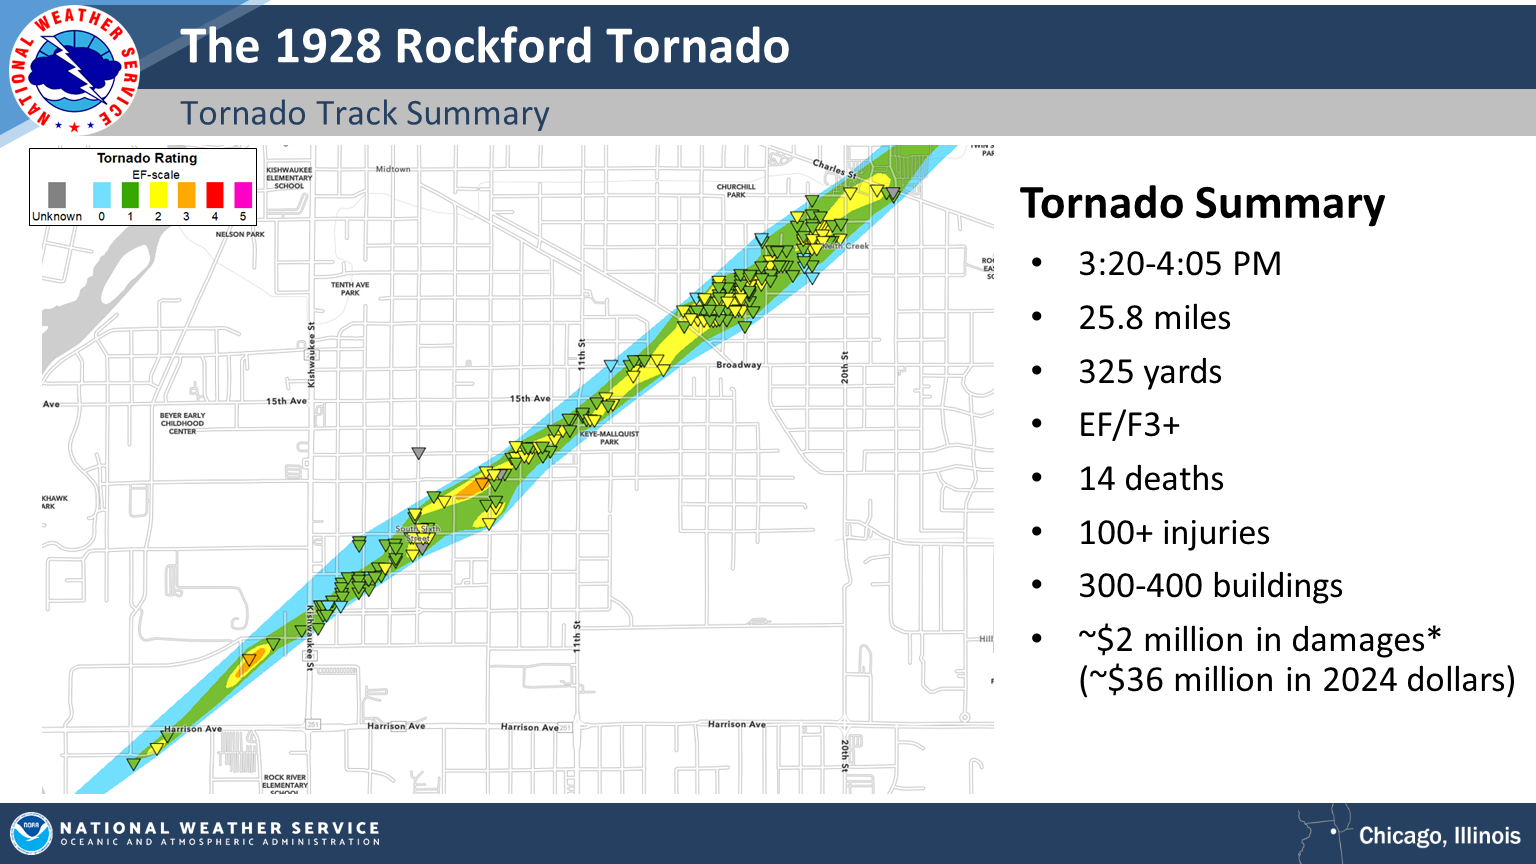 Map showing the track of the 1928 Rockford tornado, zoomed in to the Rockford area. Table to the right summarizes some details about the tornado.